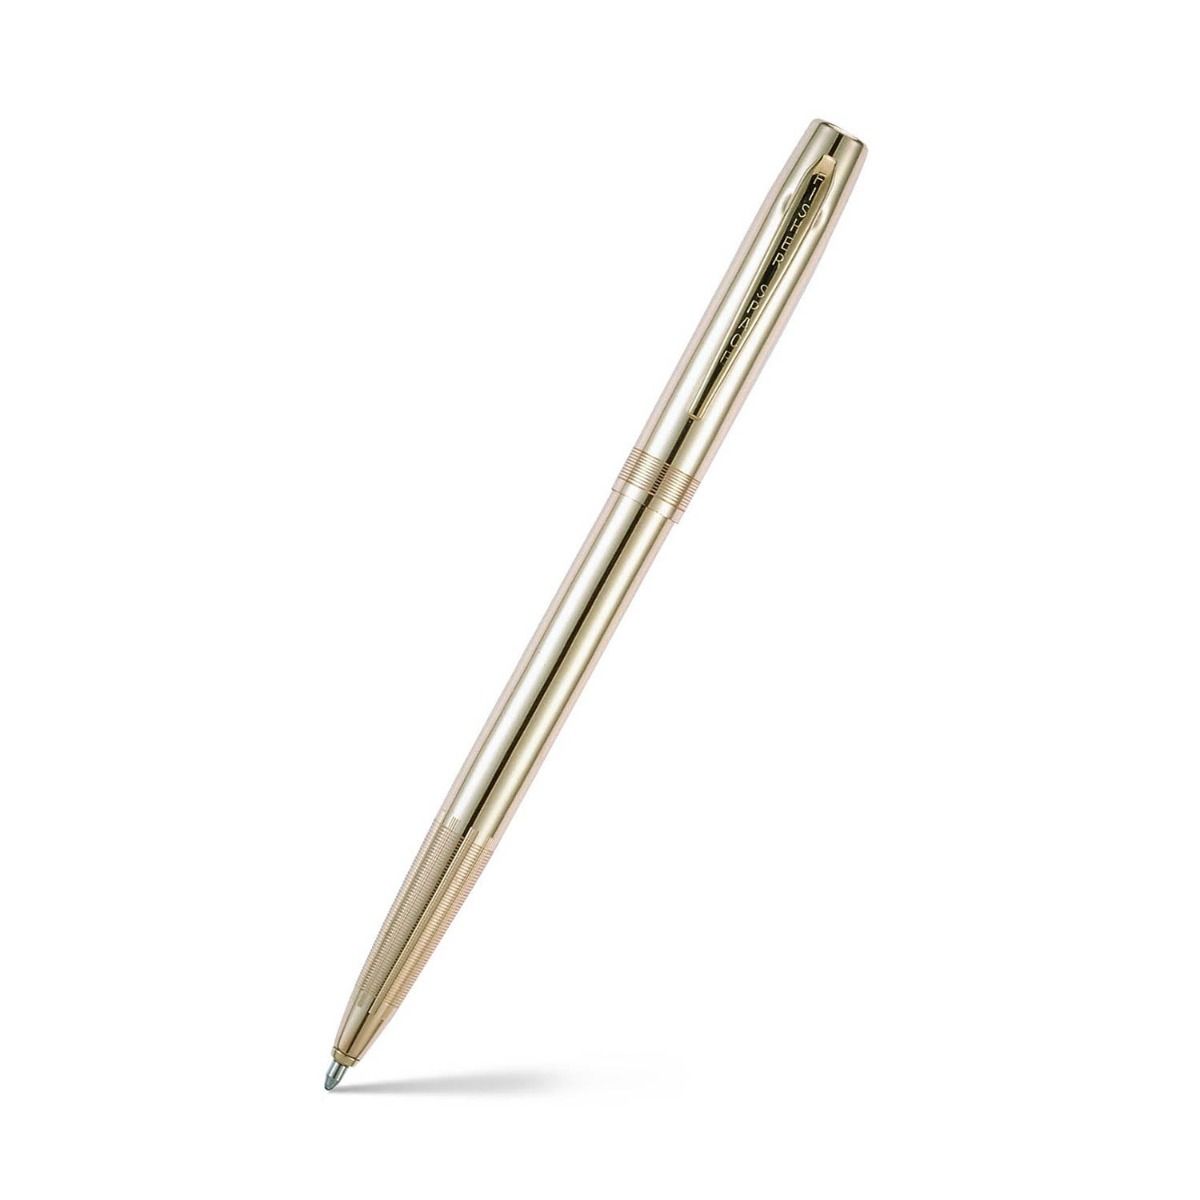 Fisher Space M4G Cap-O-Matic Ballpoint pen - Lacqured Brass